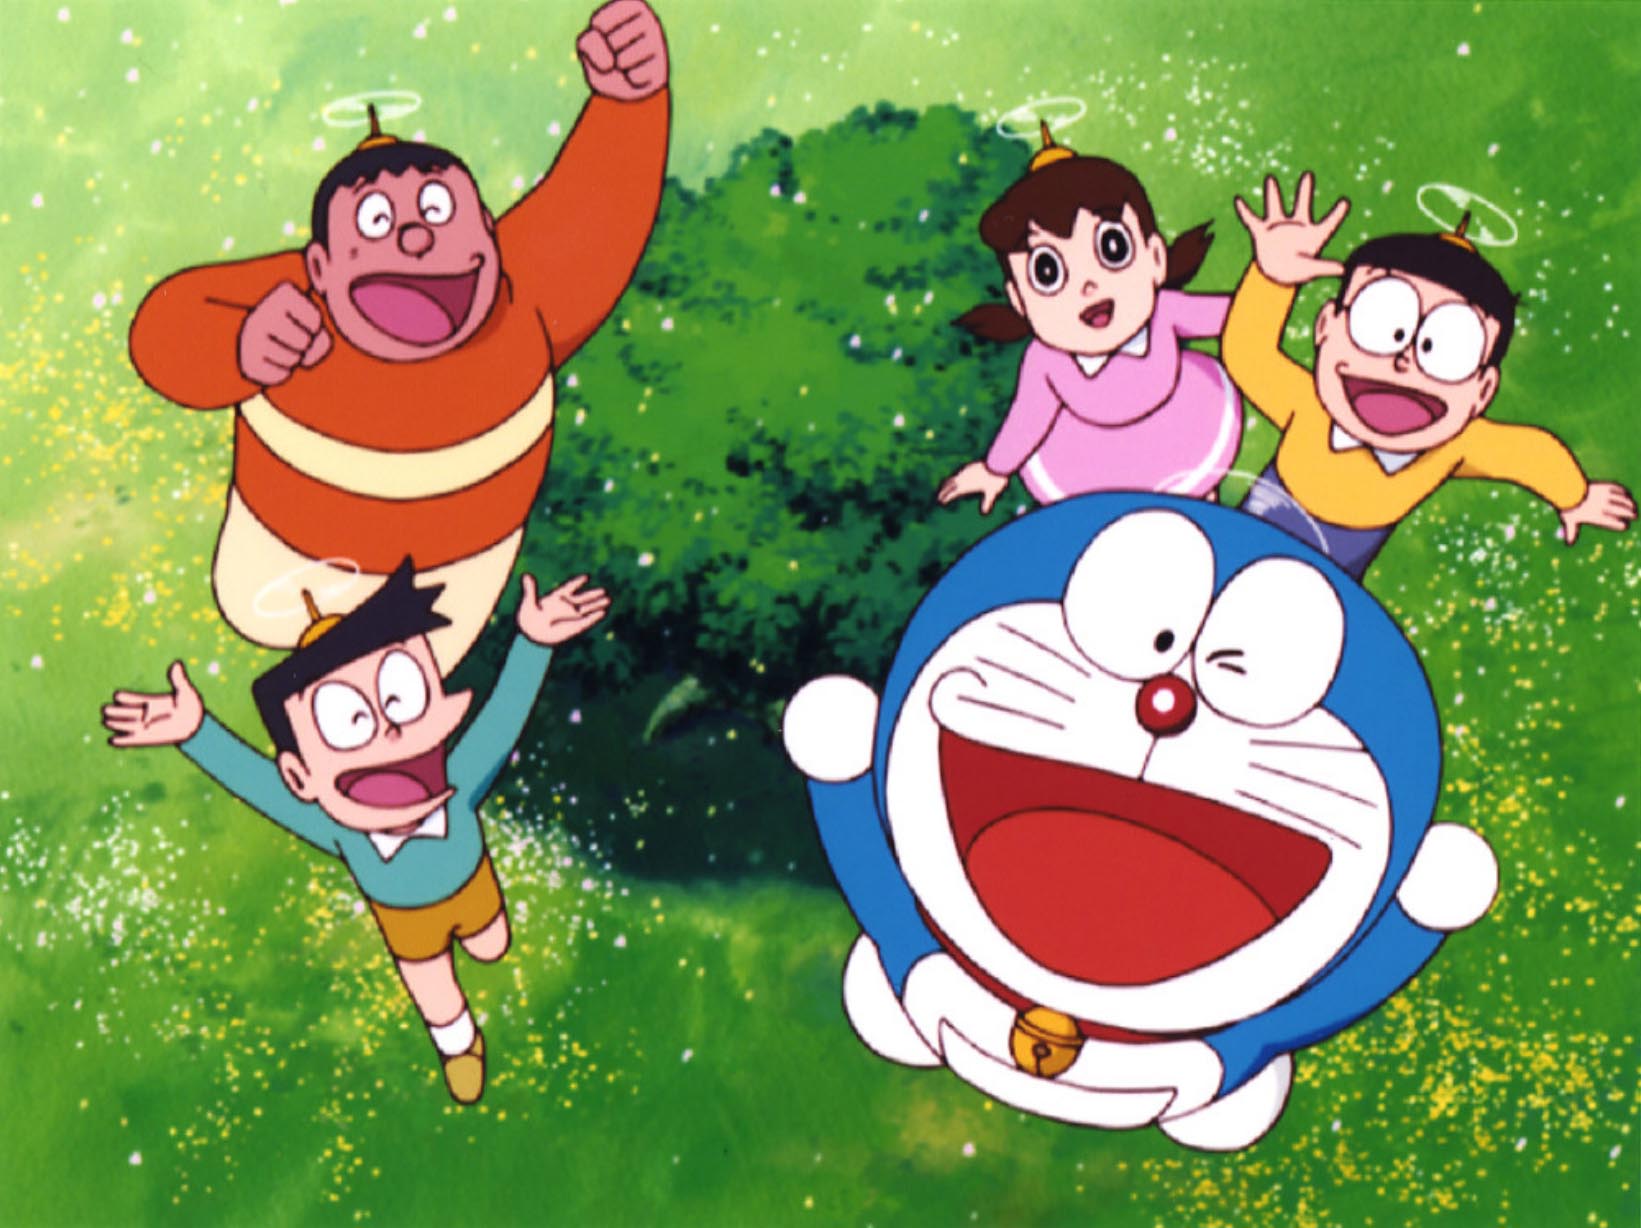 Most Funniest Doremon Episodes that will Definitely make you Laugh if you Love Doraemon